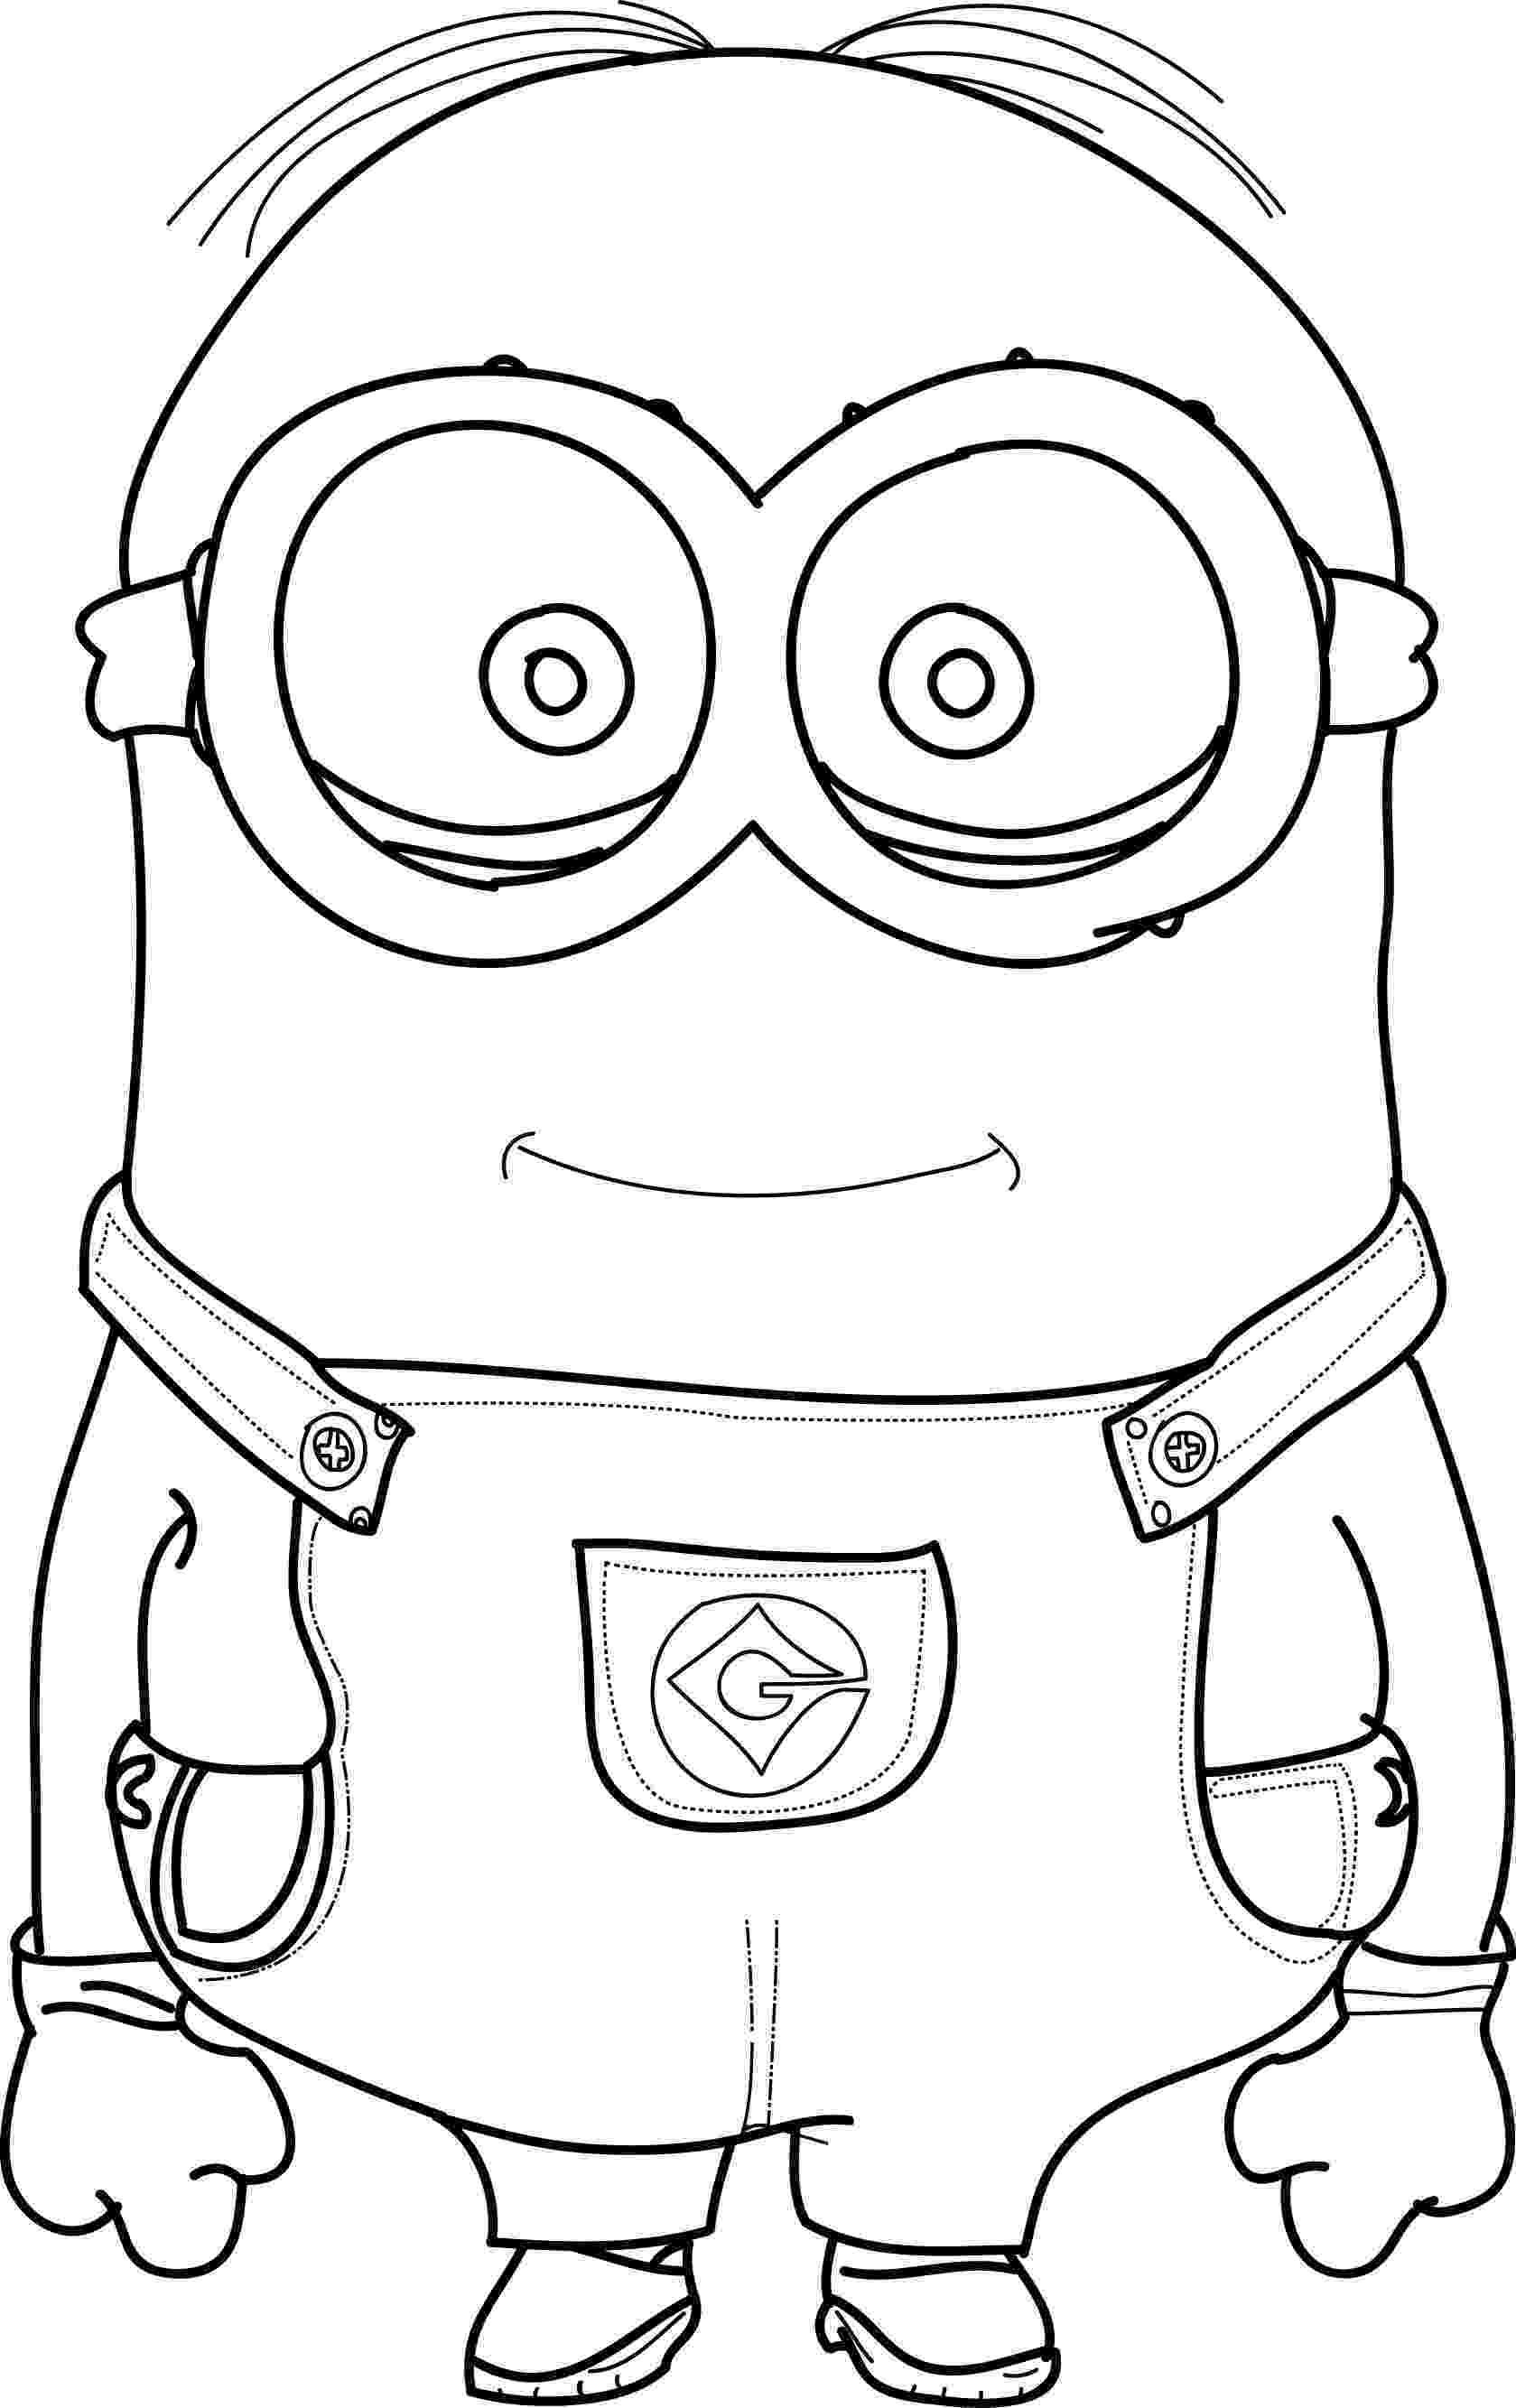 ronald mcdonald colouring pictures ronald mcdonald house coloring pages at getcoloringscom colouring ronald pictures mcdonald 